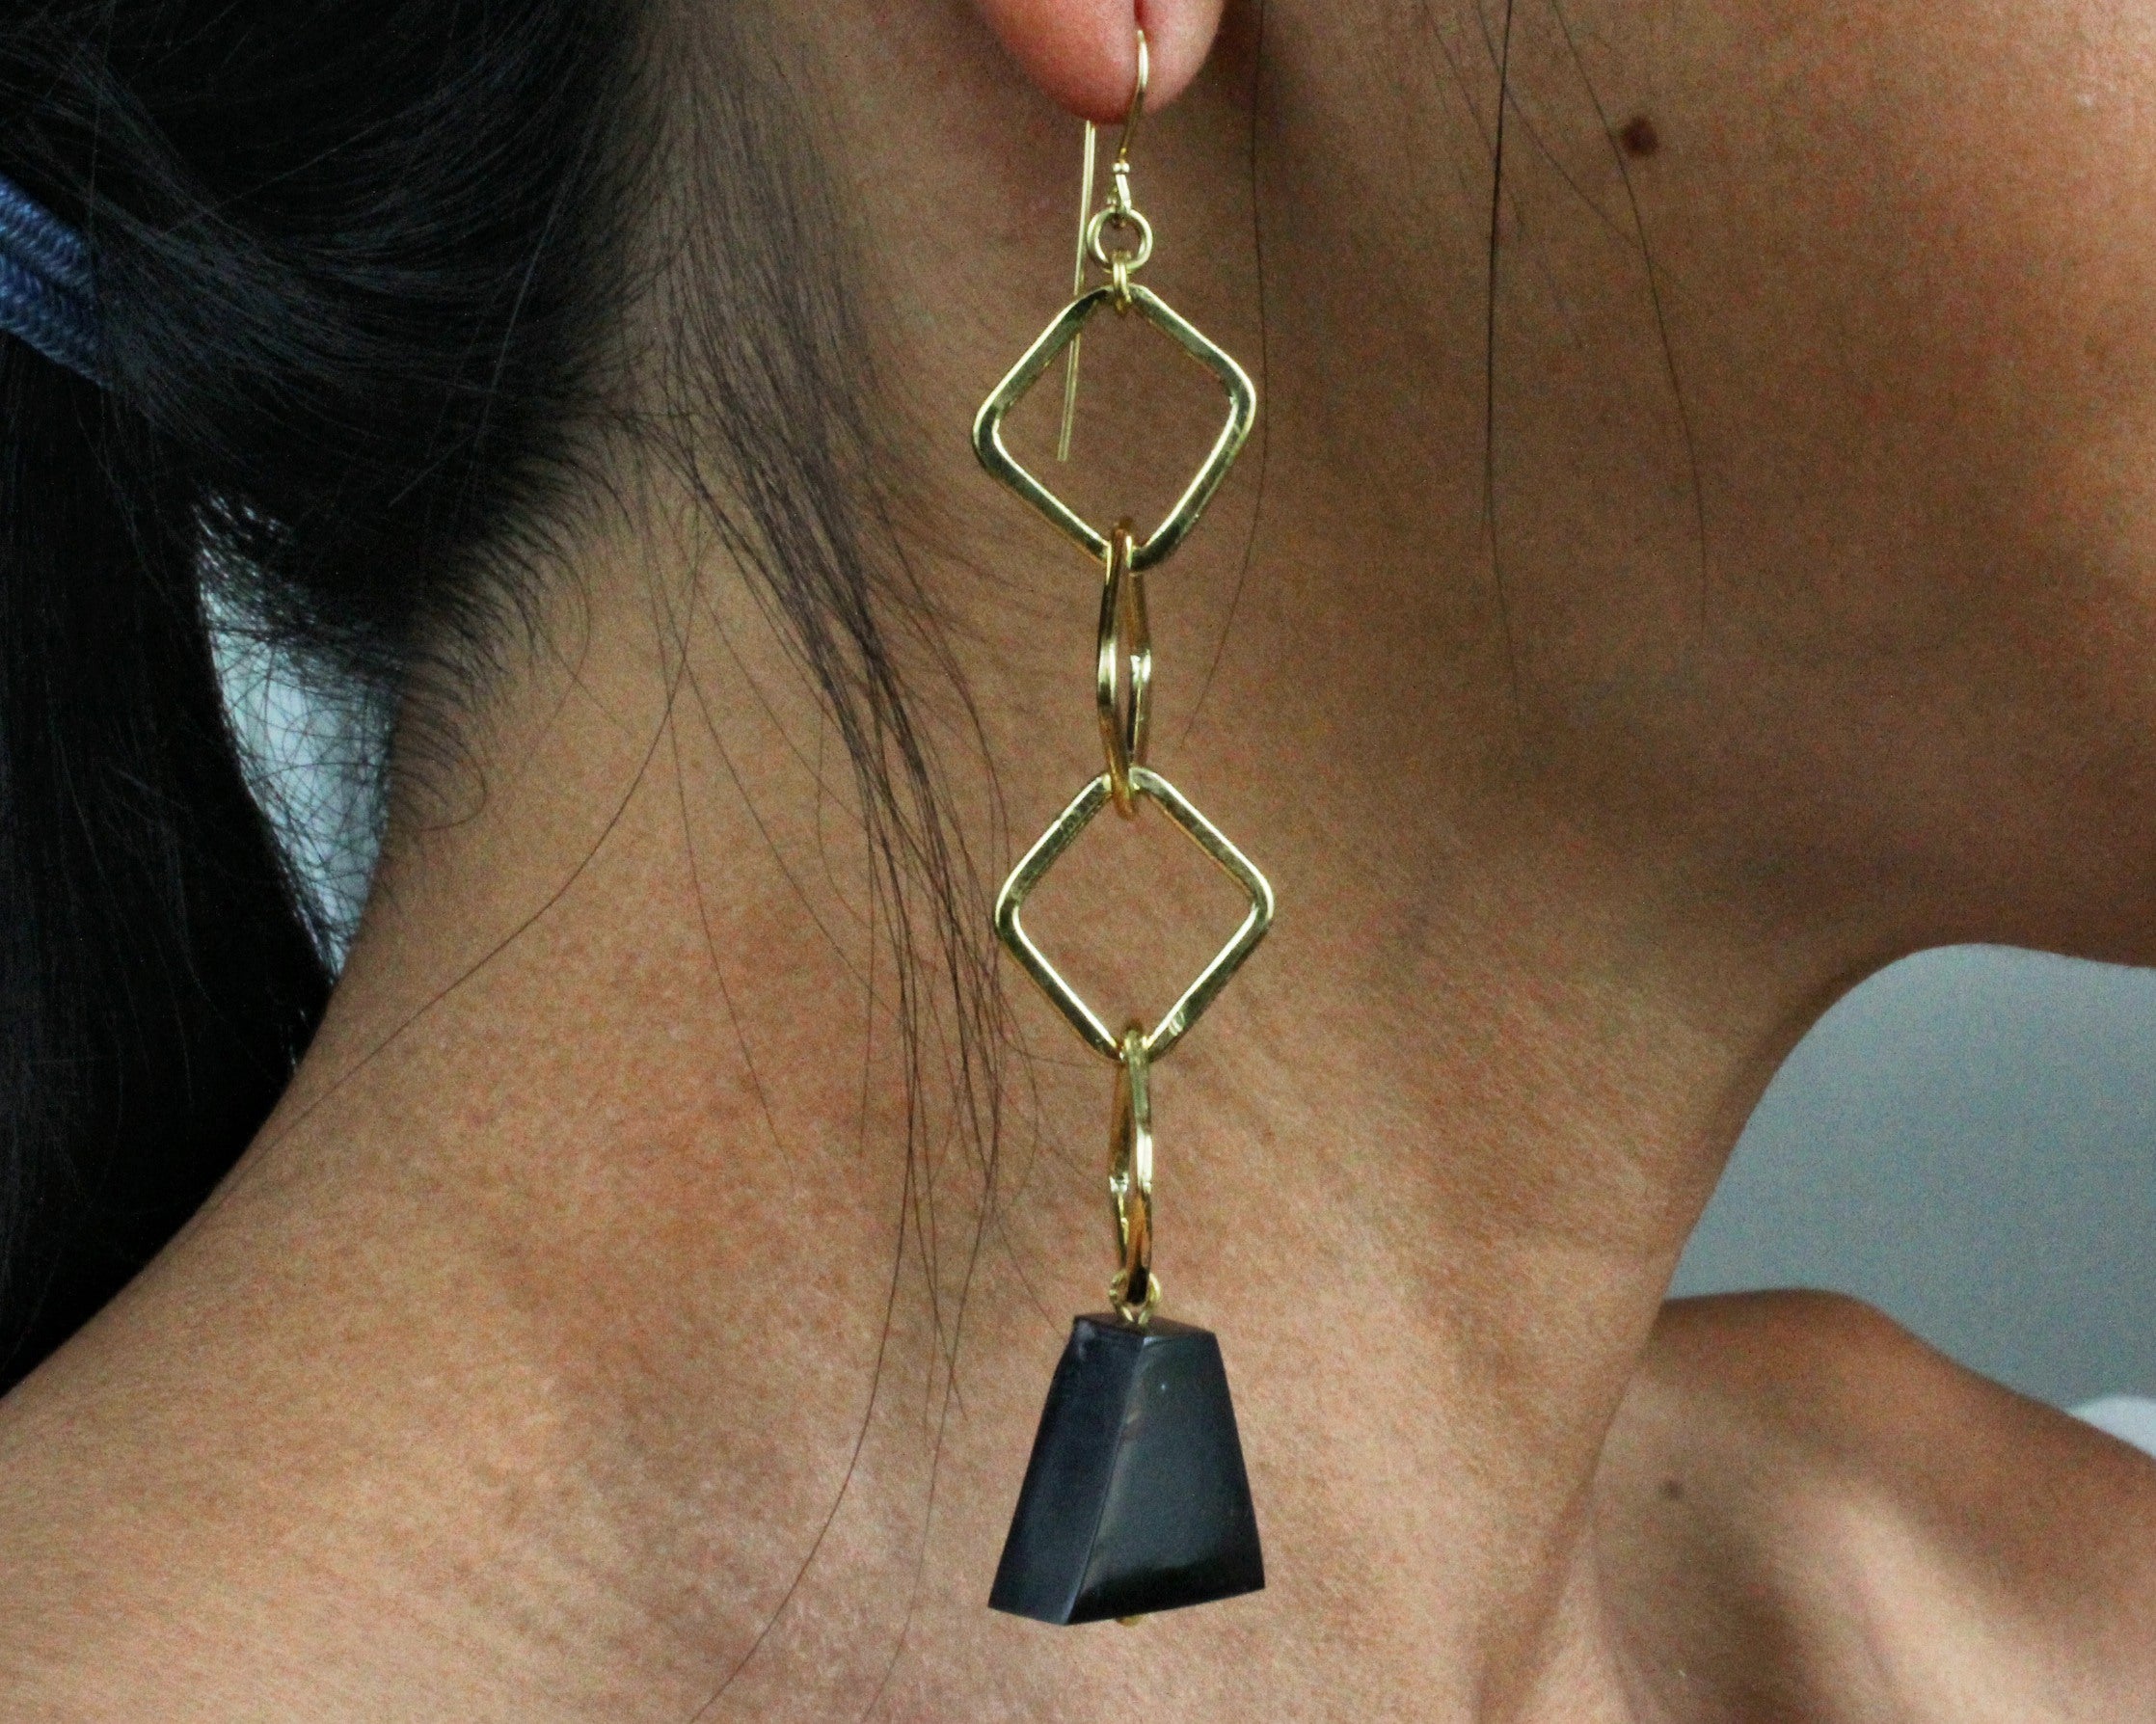 Handmade earrings, brass chain, black bell, cowhorn, recycled, upcycled, hanging from ear